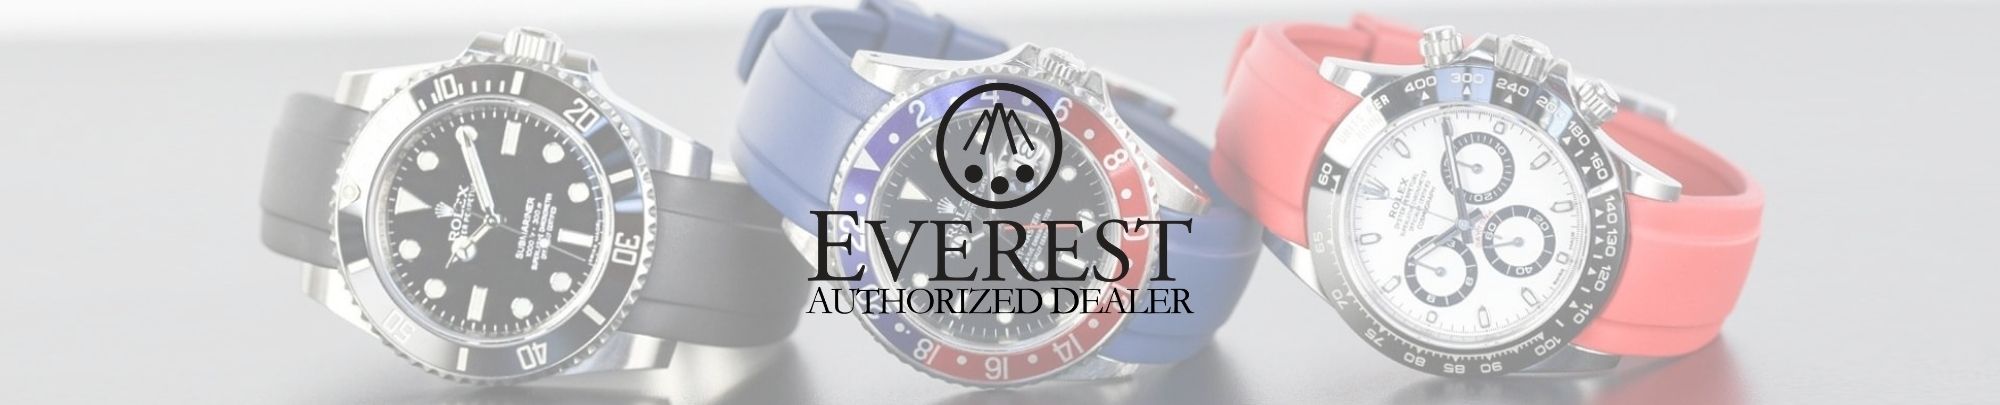 everest horology products